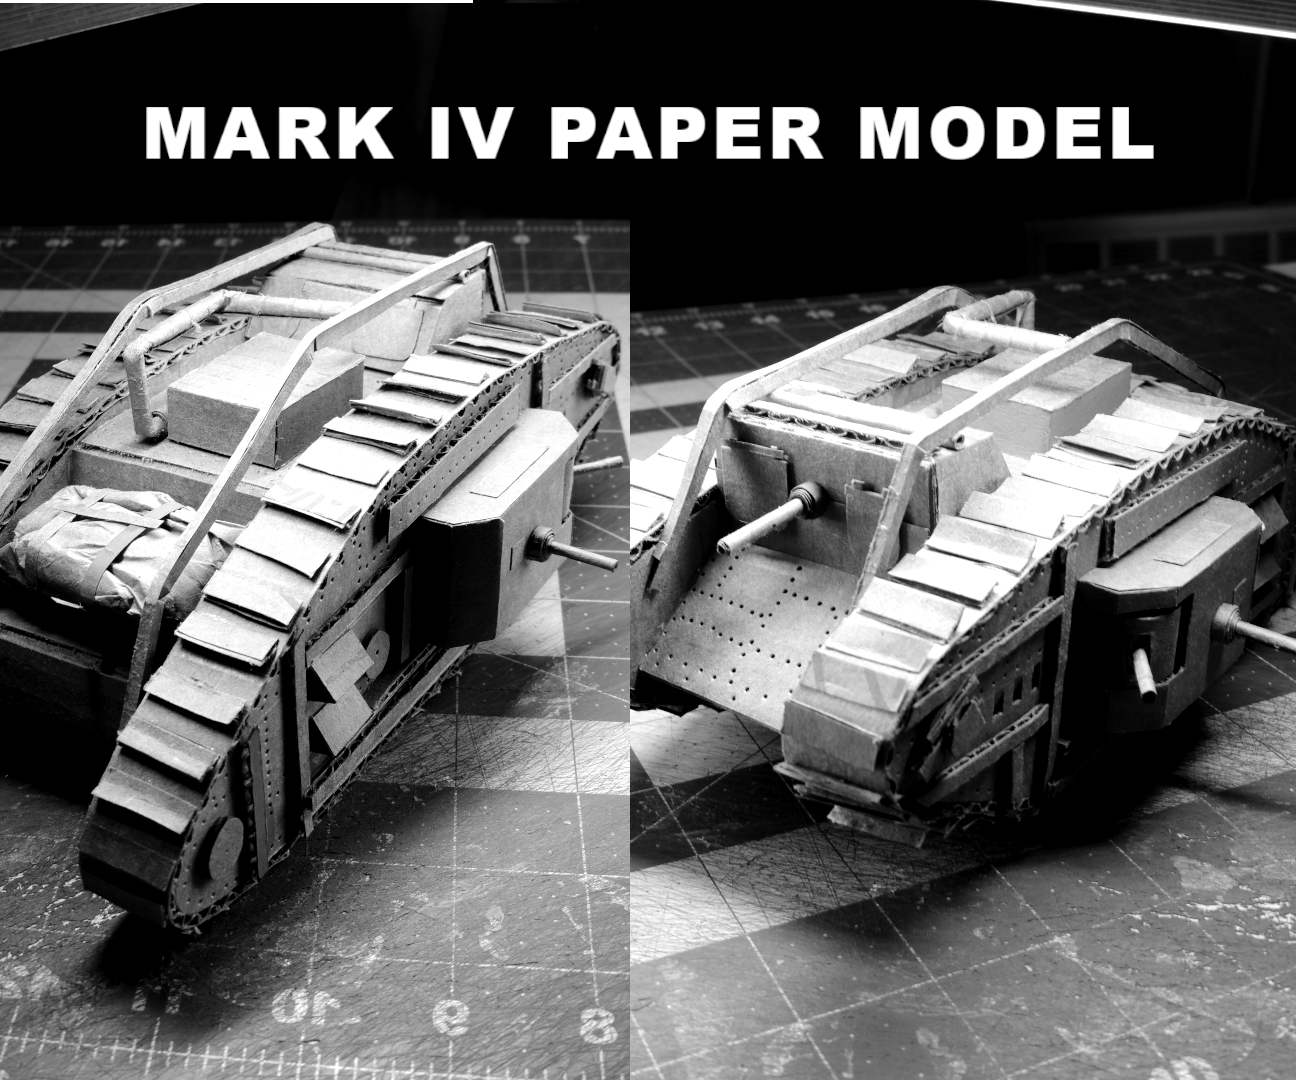 The ULTIMATE Cardboard Model Mark IV Tank With Army Men Figurines